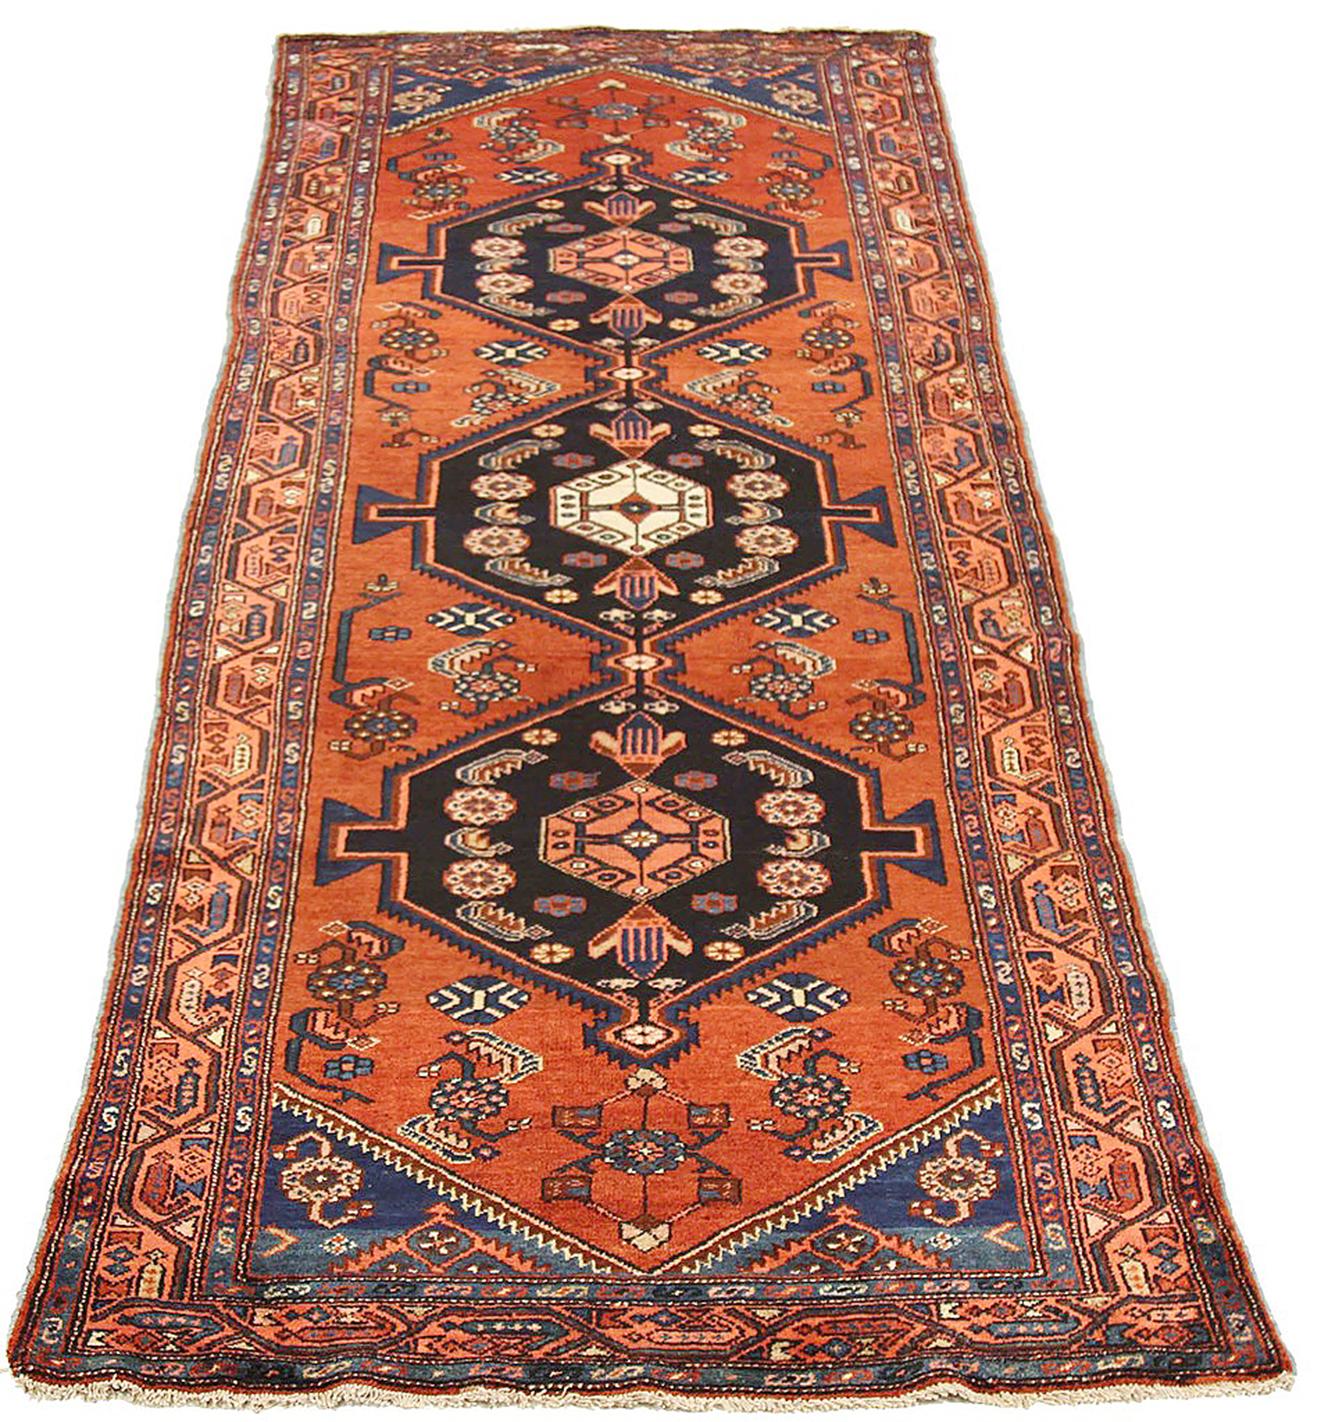 Hand-Woven 1930 Antique Persian Malayer Runner Rug with 3 Large Medallions on Center Field For Sale